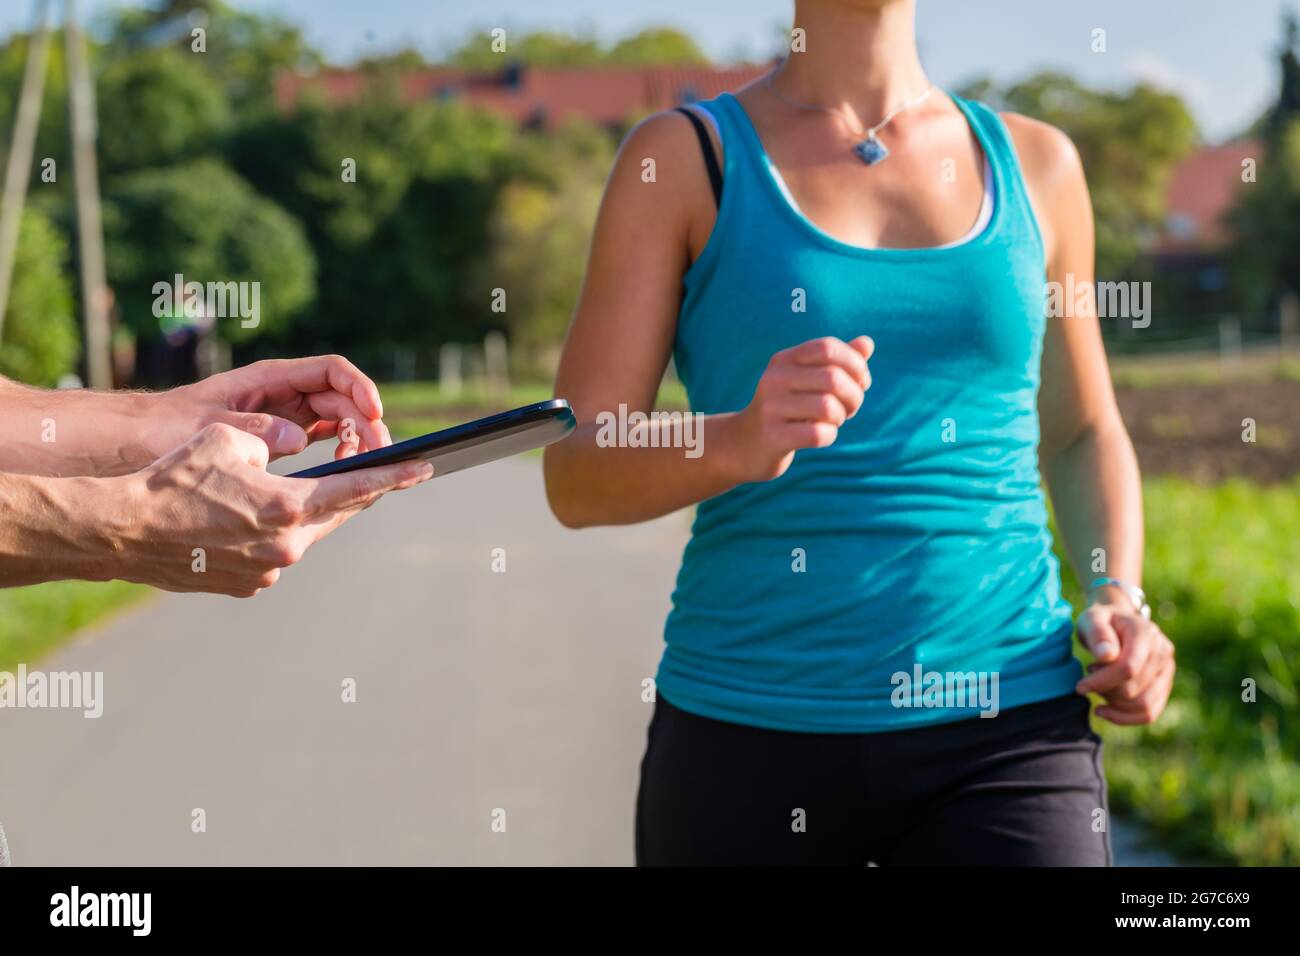 woman doing jogging or outdoor running sport for fitness on rural street, the trainer stopping her time with app on tablet computer Stock Photo